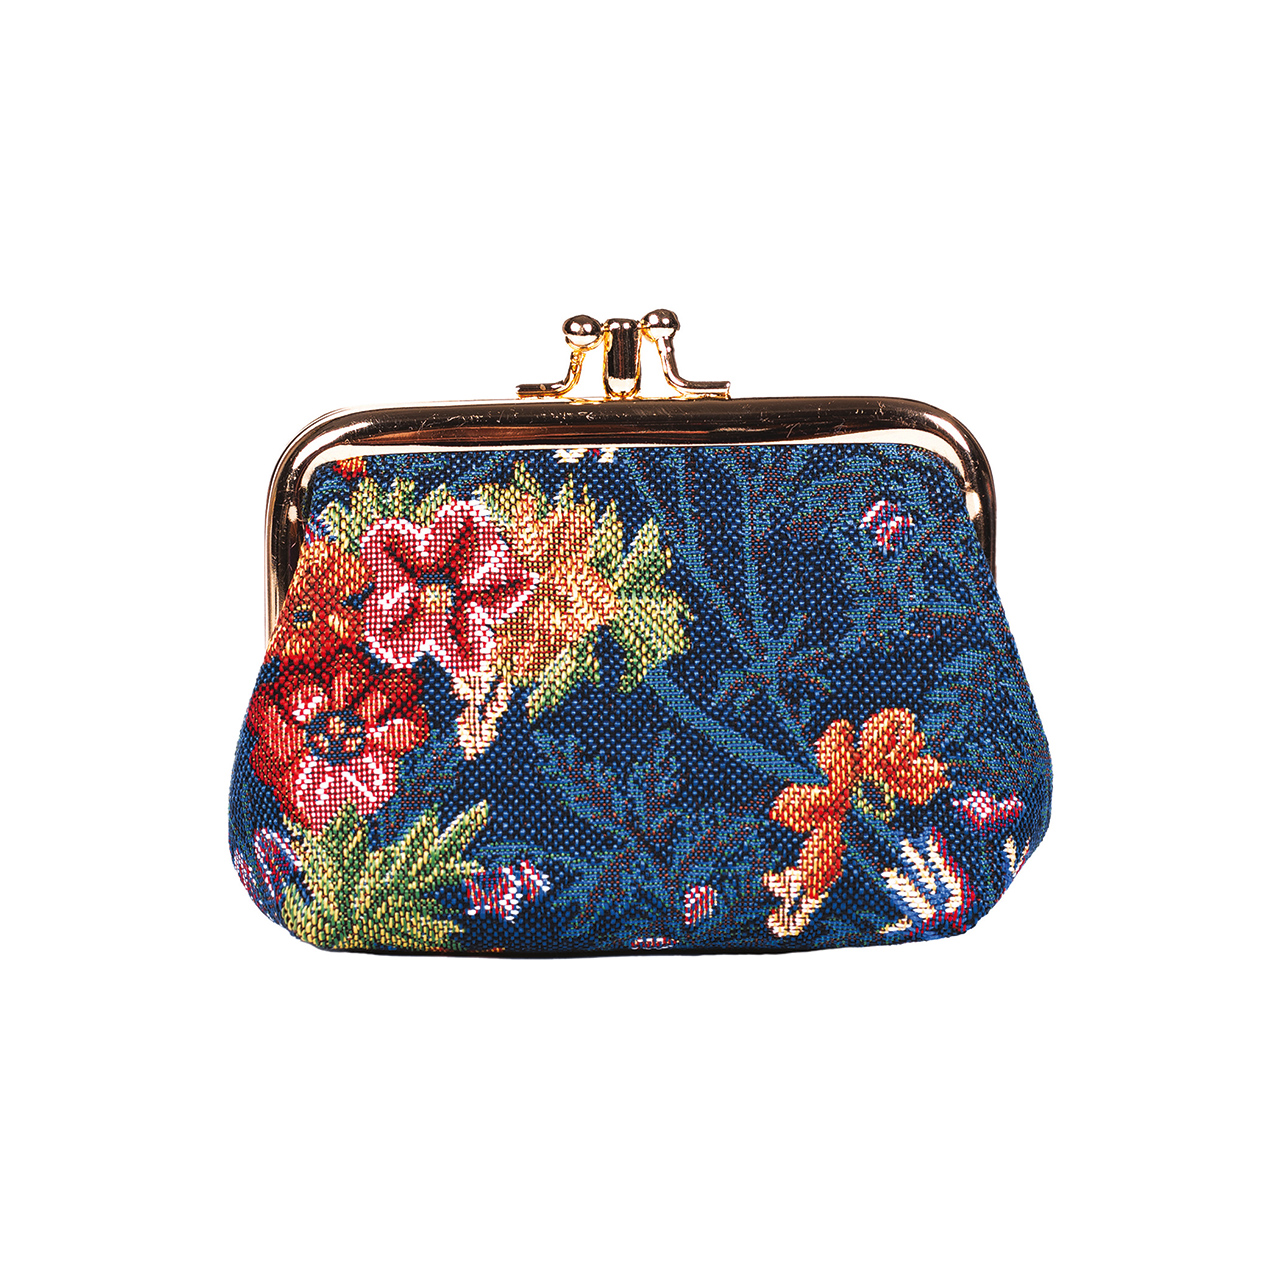 Lost In Vinatge Bohemian Inspiration Baroque Floral Tapestry Clutch Purse  Strap Gold-tone Metal Frame Kiss Lock Evening Bag - Evening Bags -  AliExpress